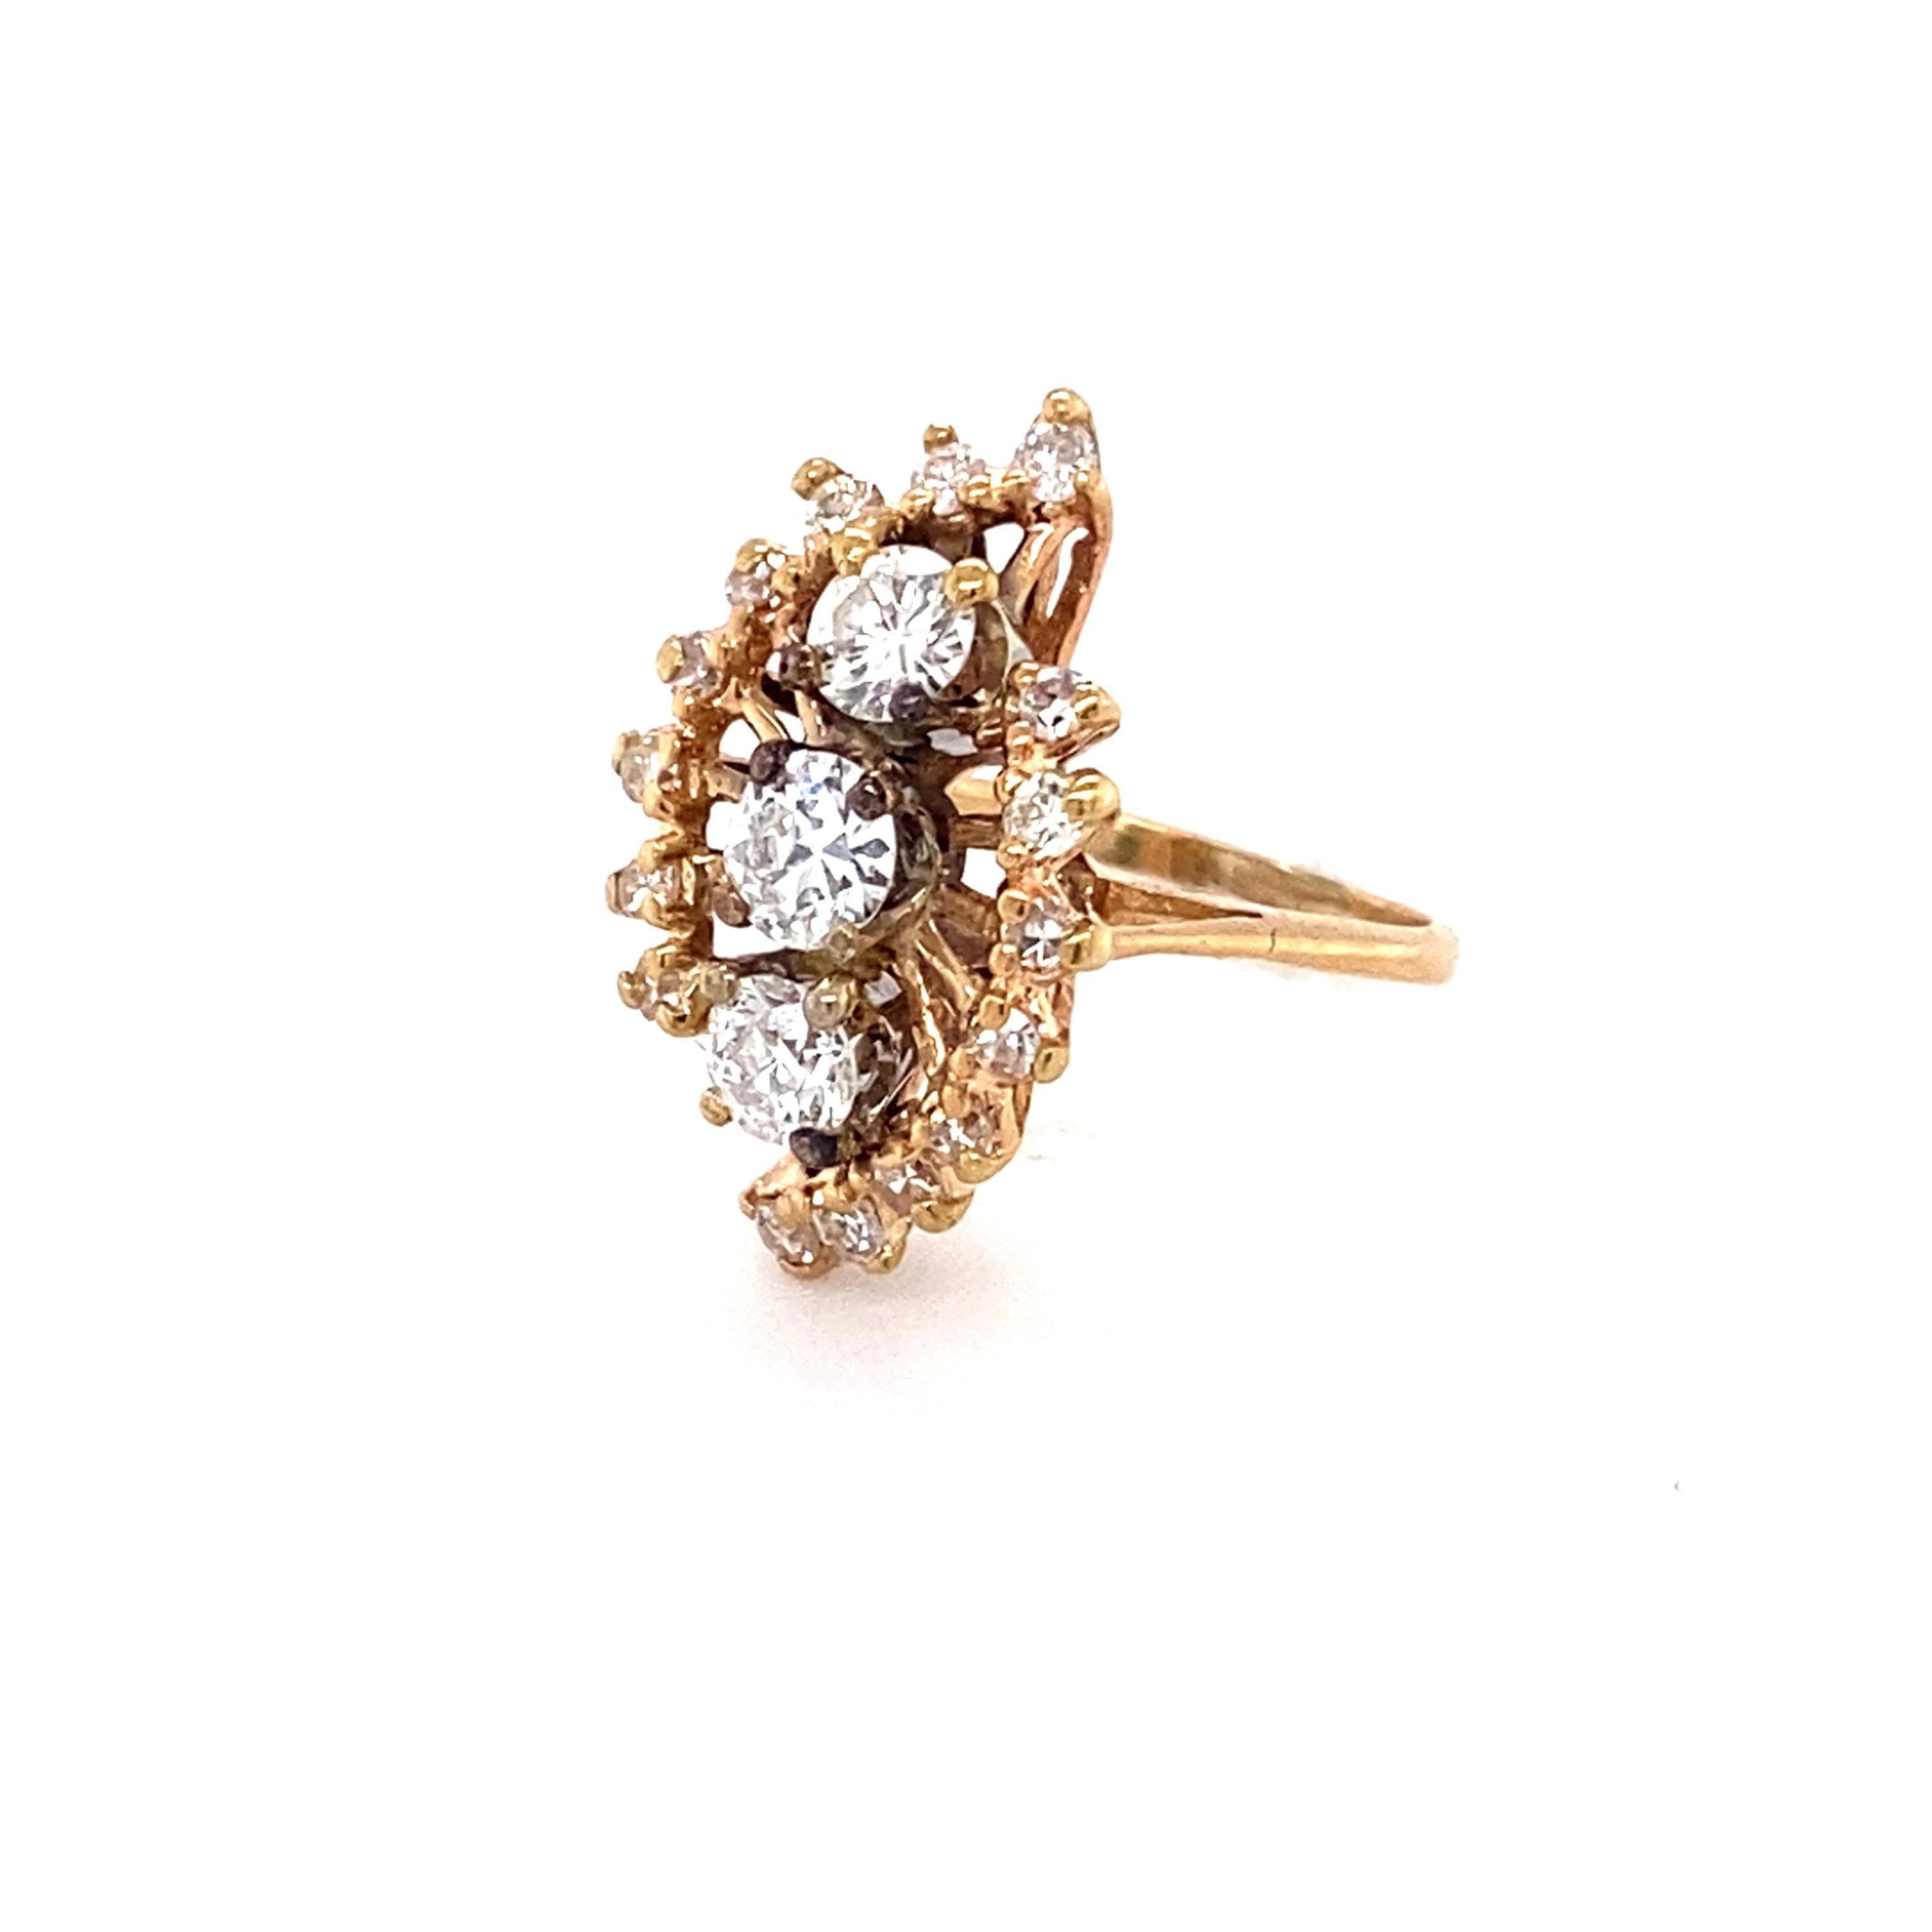 Item Details: 
Ring Size: 3, resizable
Metal Type: 14 Karat Yellow Gold
Weight: 3.2 grams
Finger to top of stone measures 7.5 millimeters, and 13 millimeters across

Center Diamond Details:
Cut: Old European 
Carat: 0.60 Carats total weight
Color: